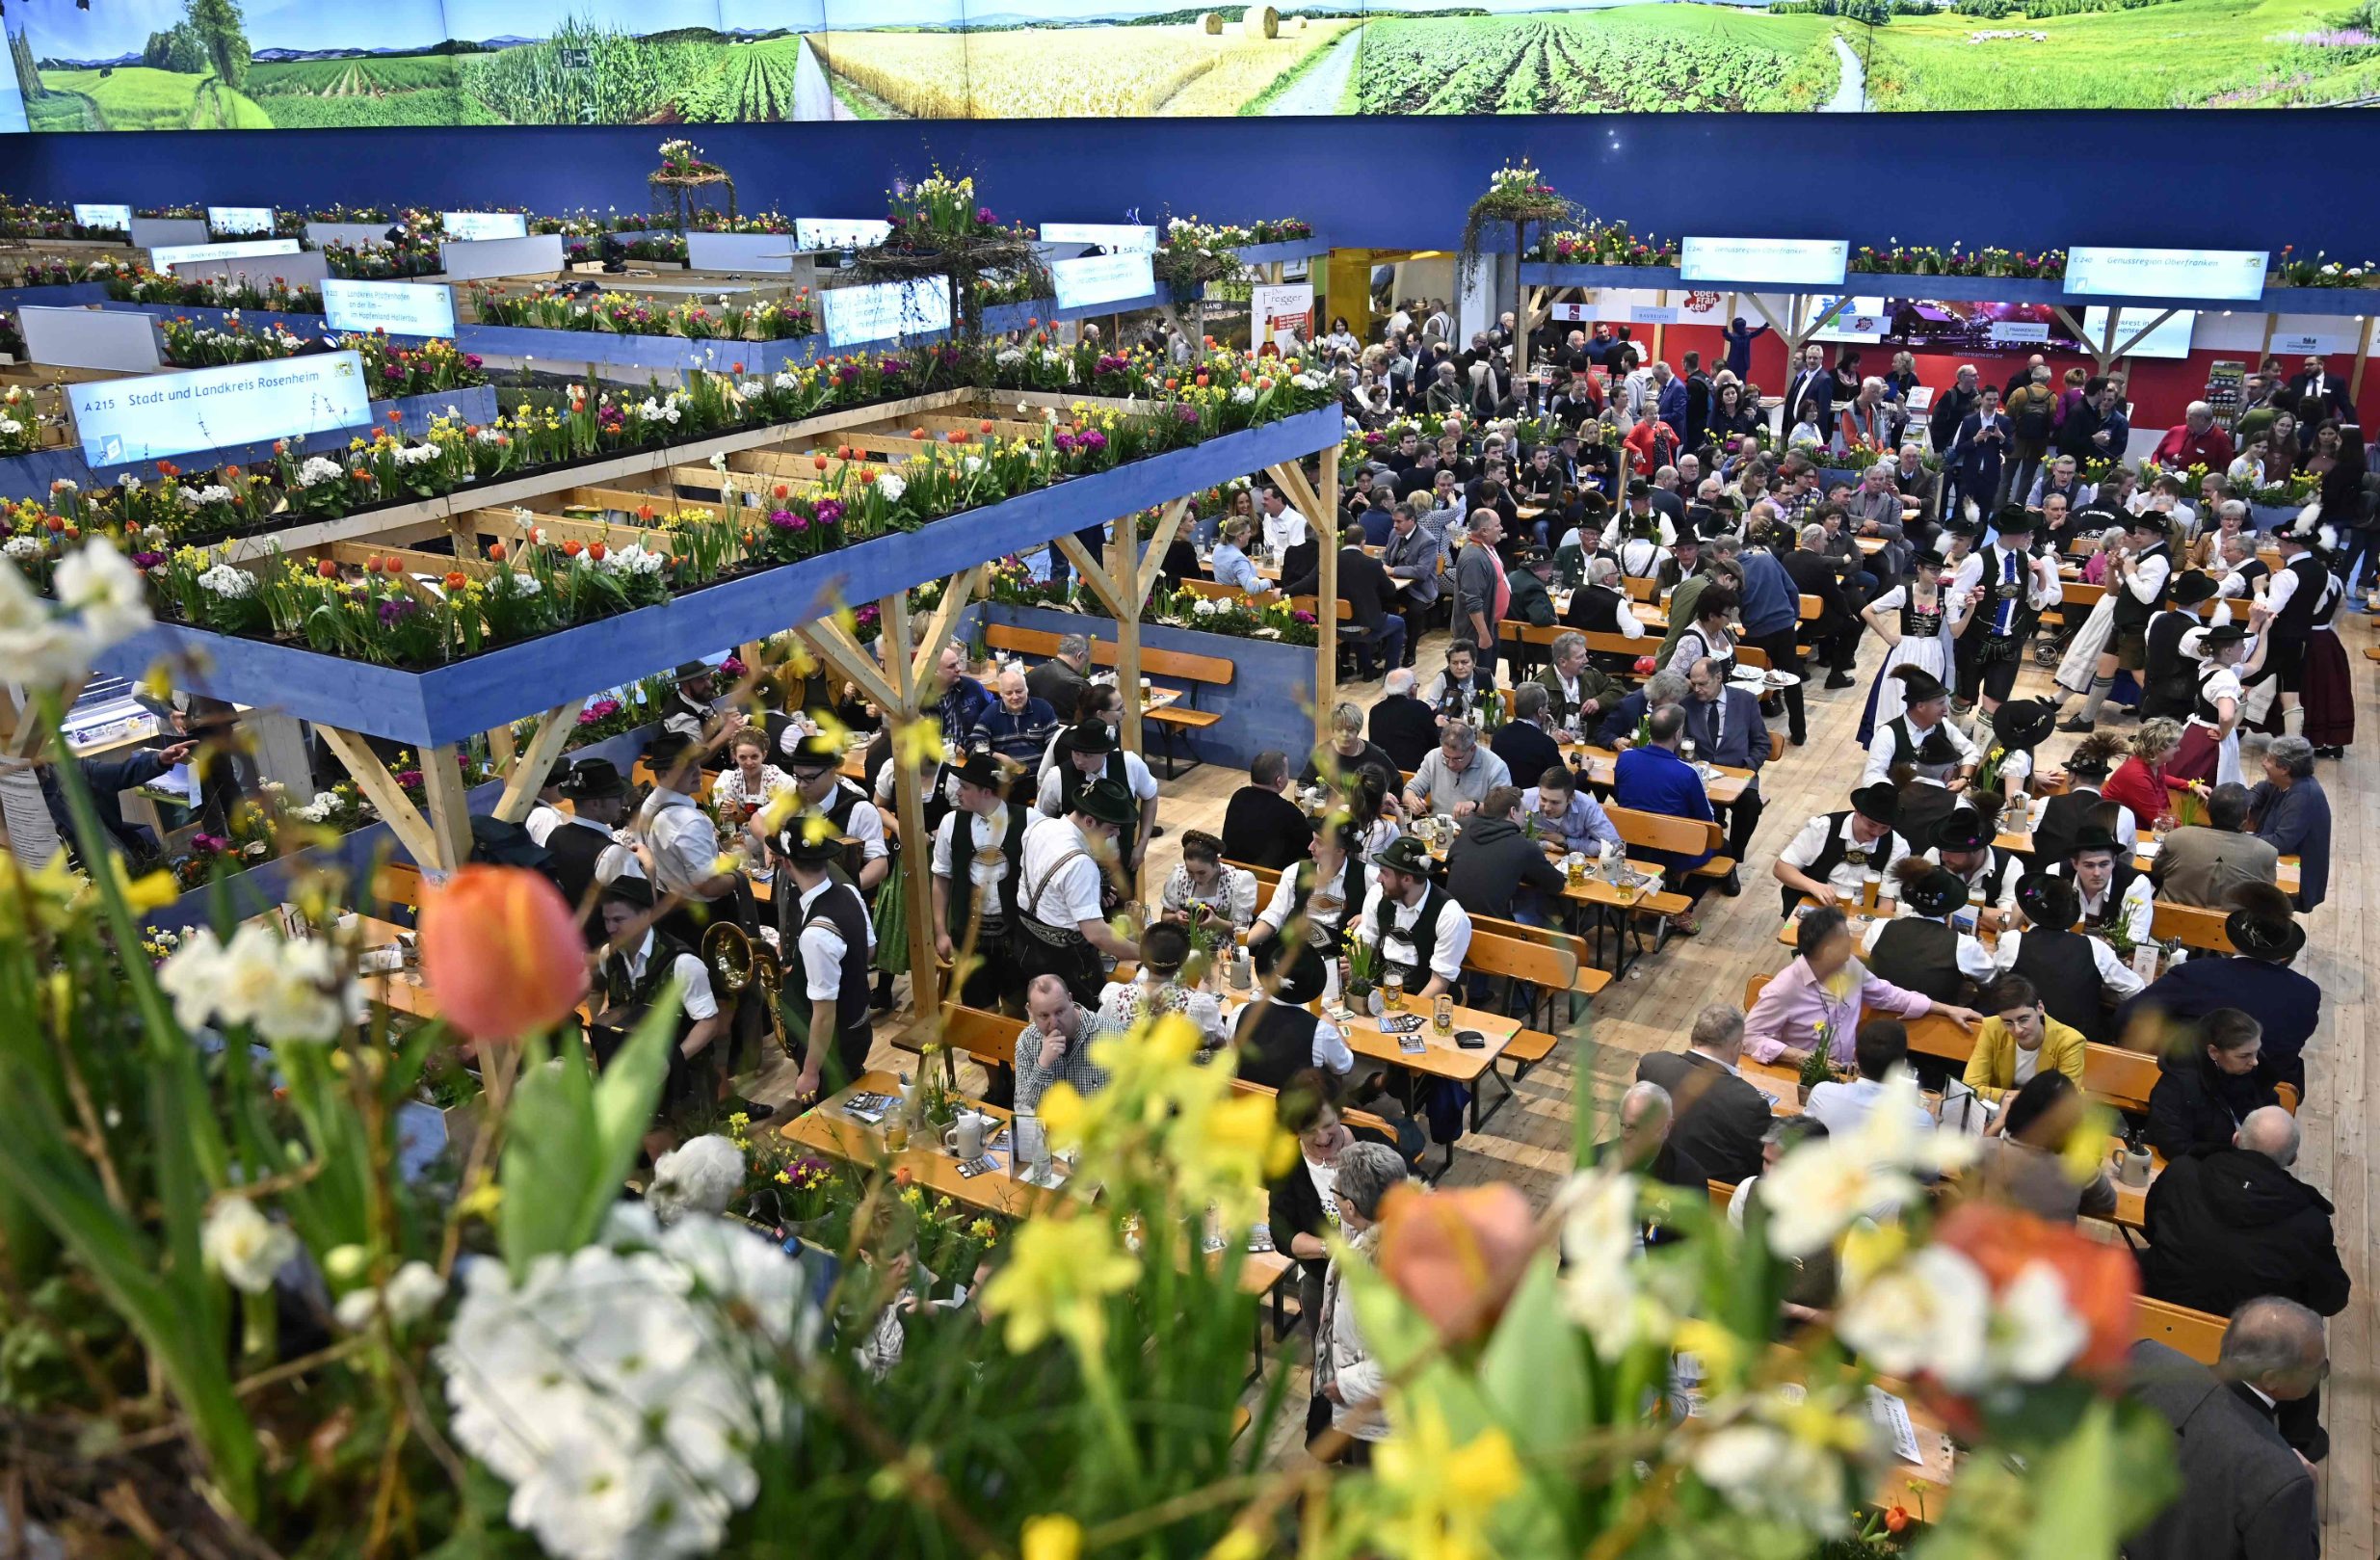 An overview shows the booth of the German federal state of Bavaria during the opening day of the Gruene Woche (Green Week) international agriculture fair in Berlin on January 17, 2020. - The fair officially opens on January 17, 2020 and runs until January 26, with Croatia as partner country of the Green Week 2020. (Photo by Tobias SCHWARZ / AFP)